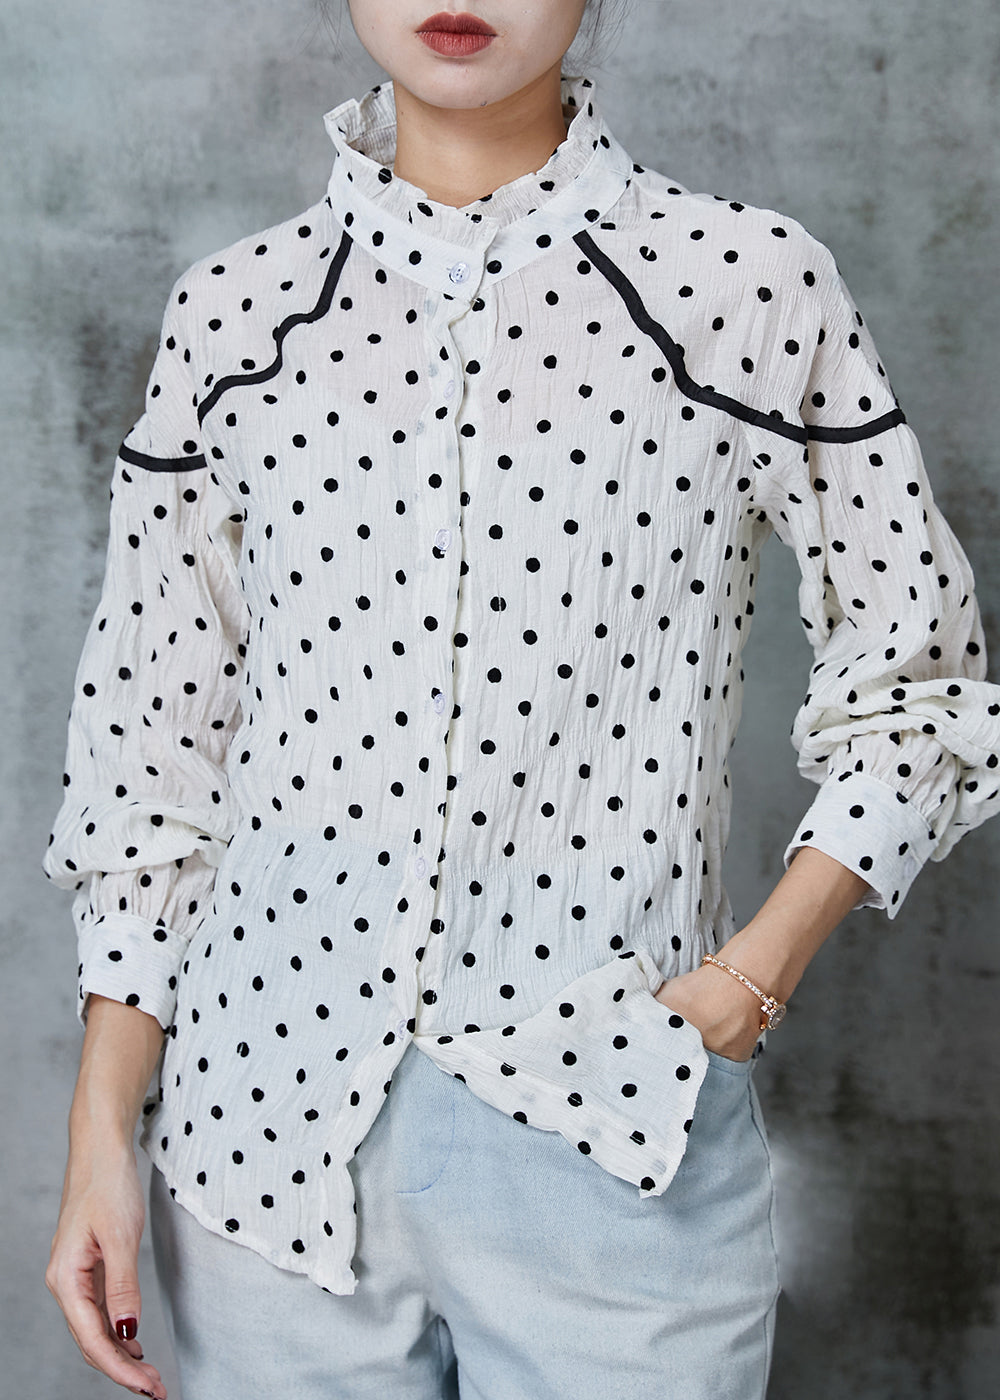 French White Stand Collar Dot Cotton Shirt Tops Spring